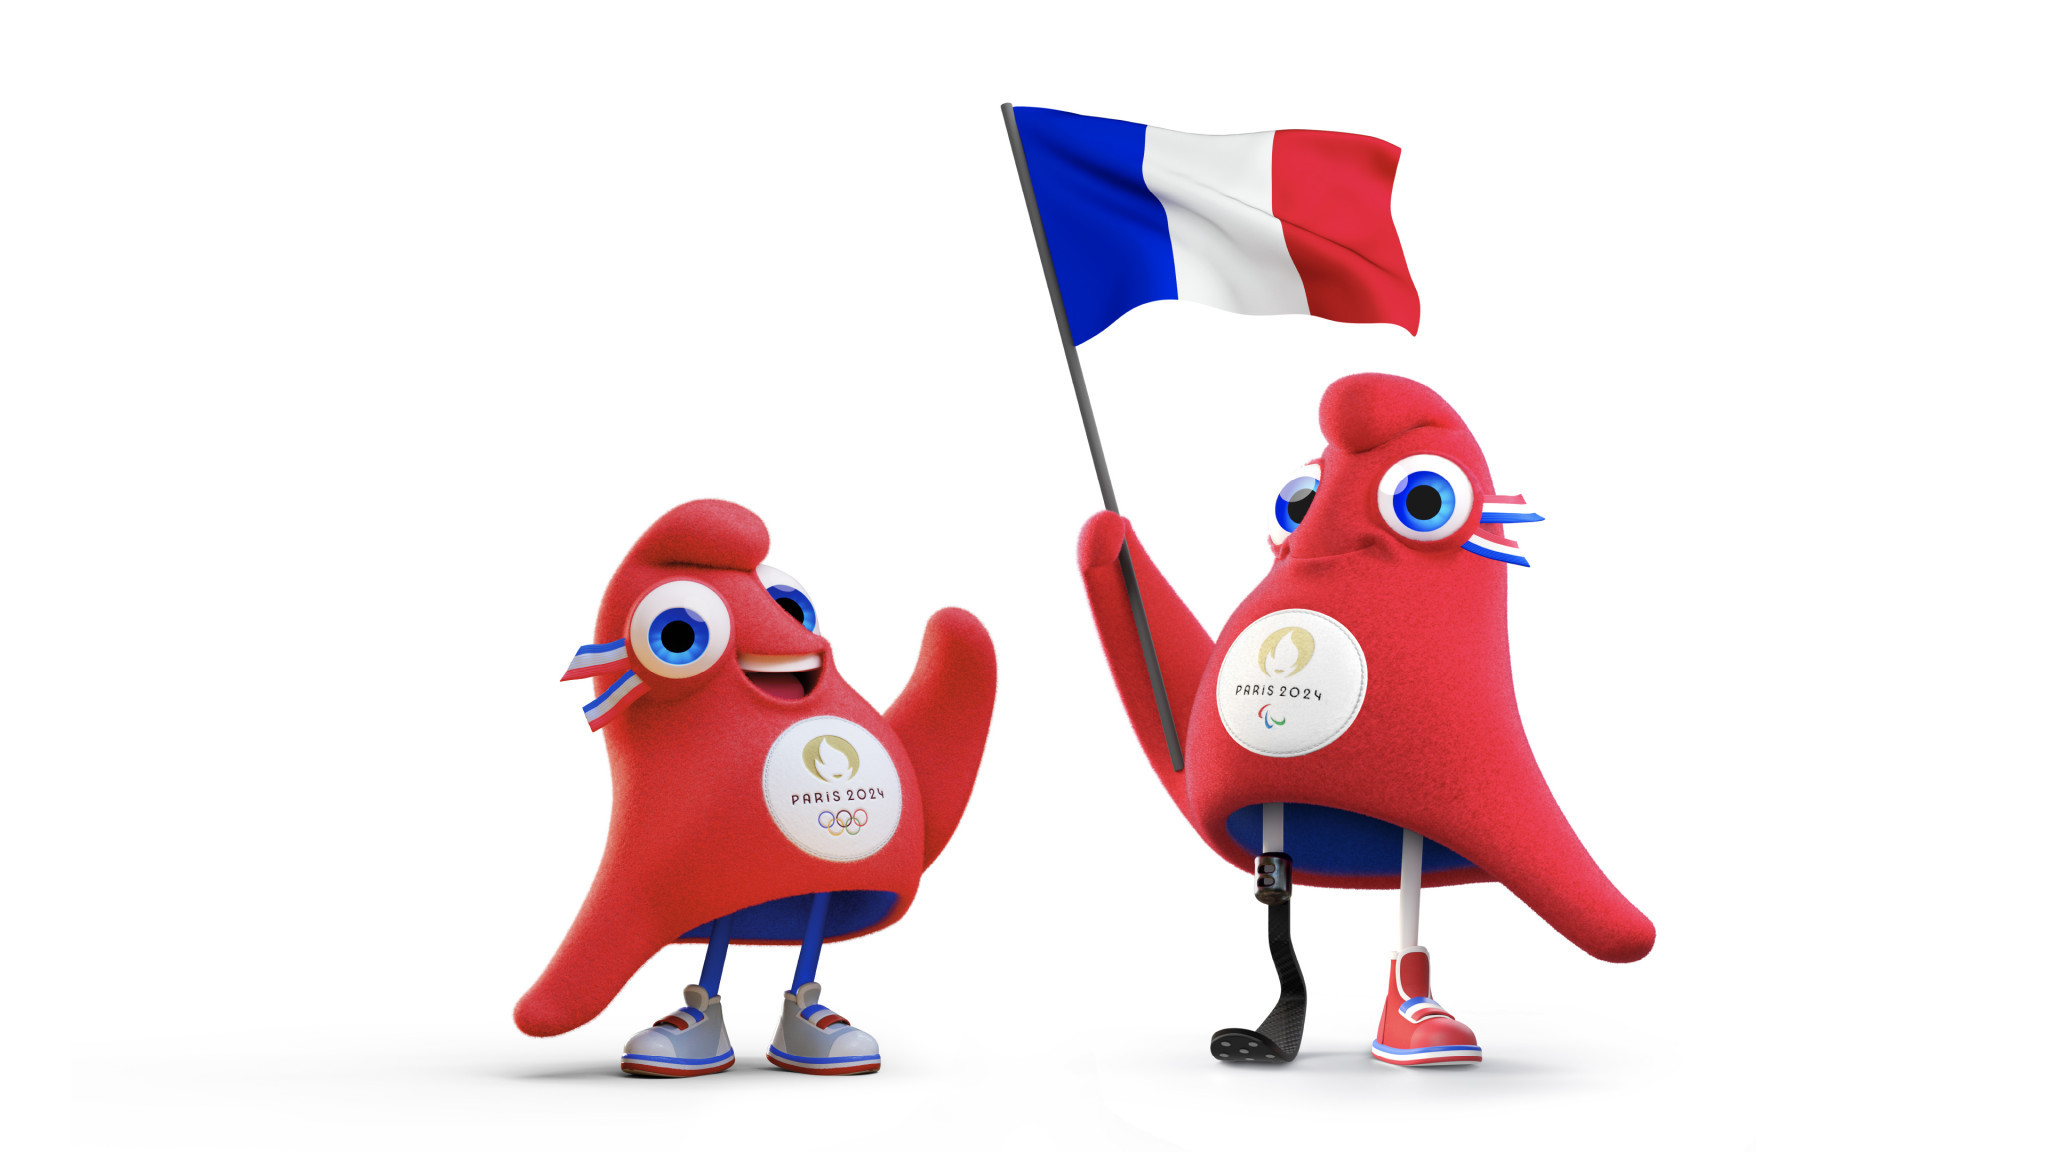 The newly-revealed Paris 2024 mascots are based on an ideal embodied by a Phrygian Cap ©Paris 2024